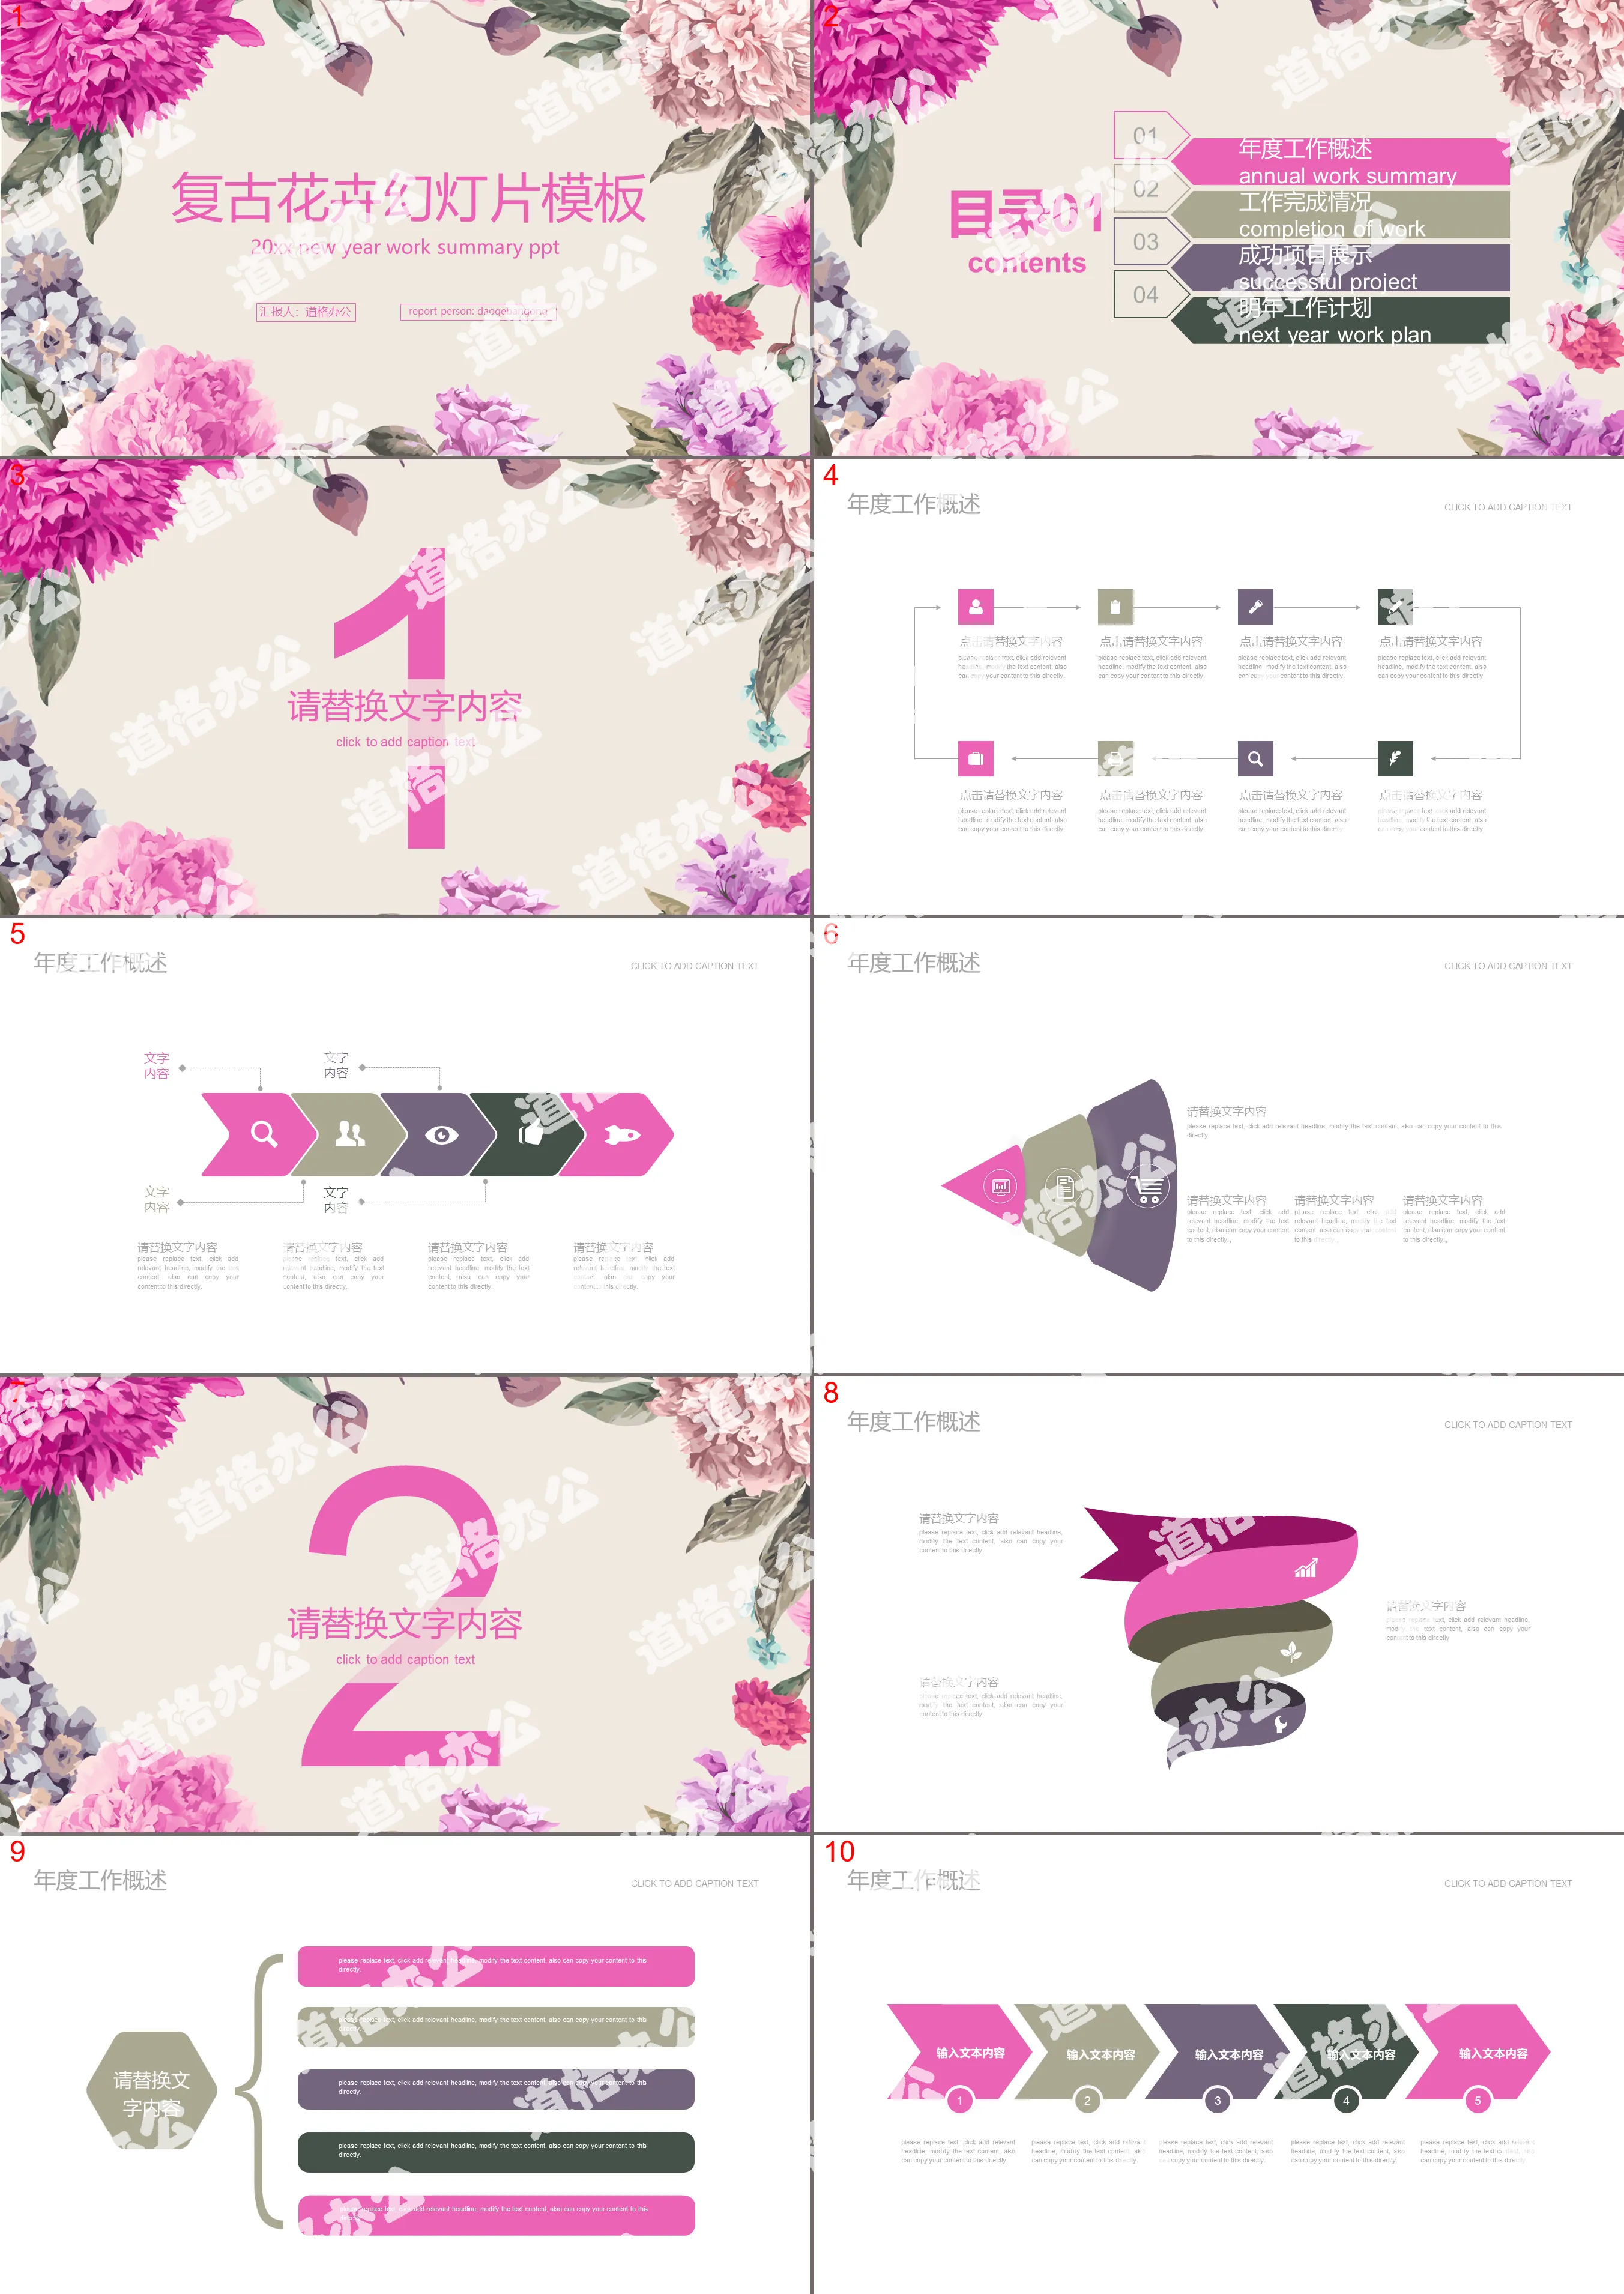 Retro hand-painted art flowers PPT template